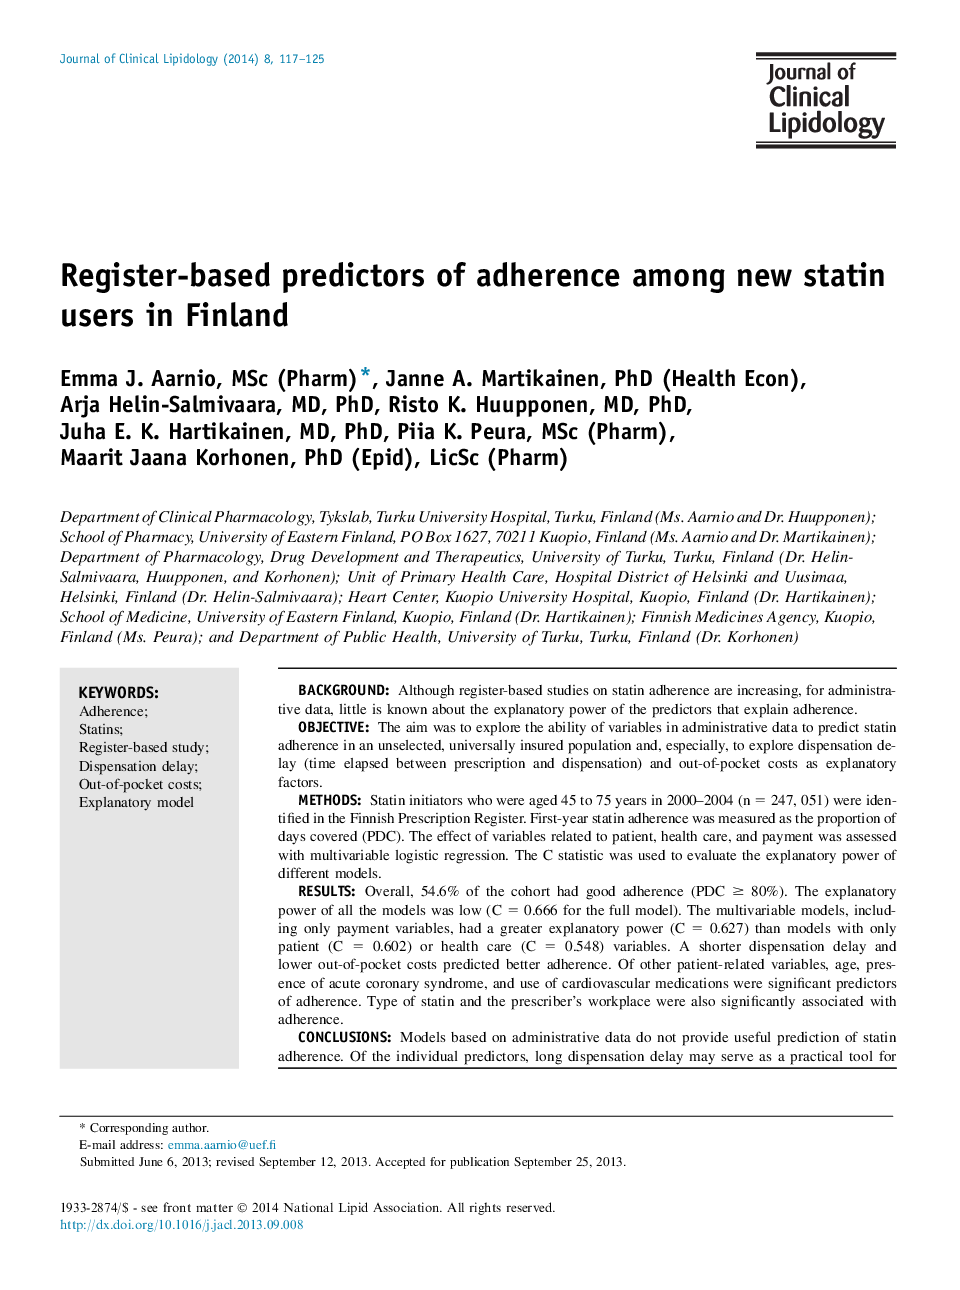 Register-based predictors of adherence among new statin users in Finland